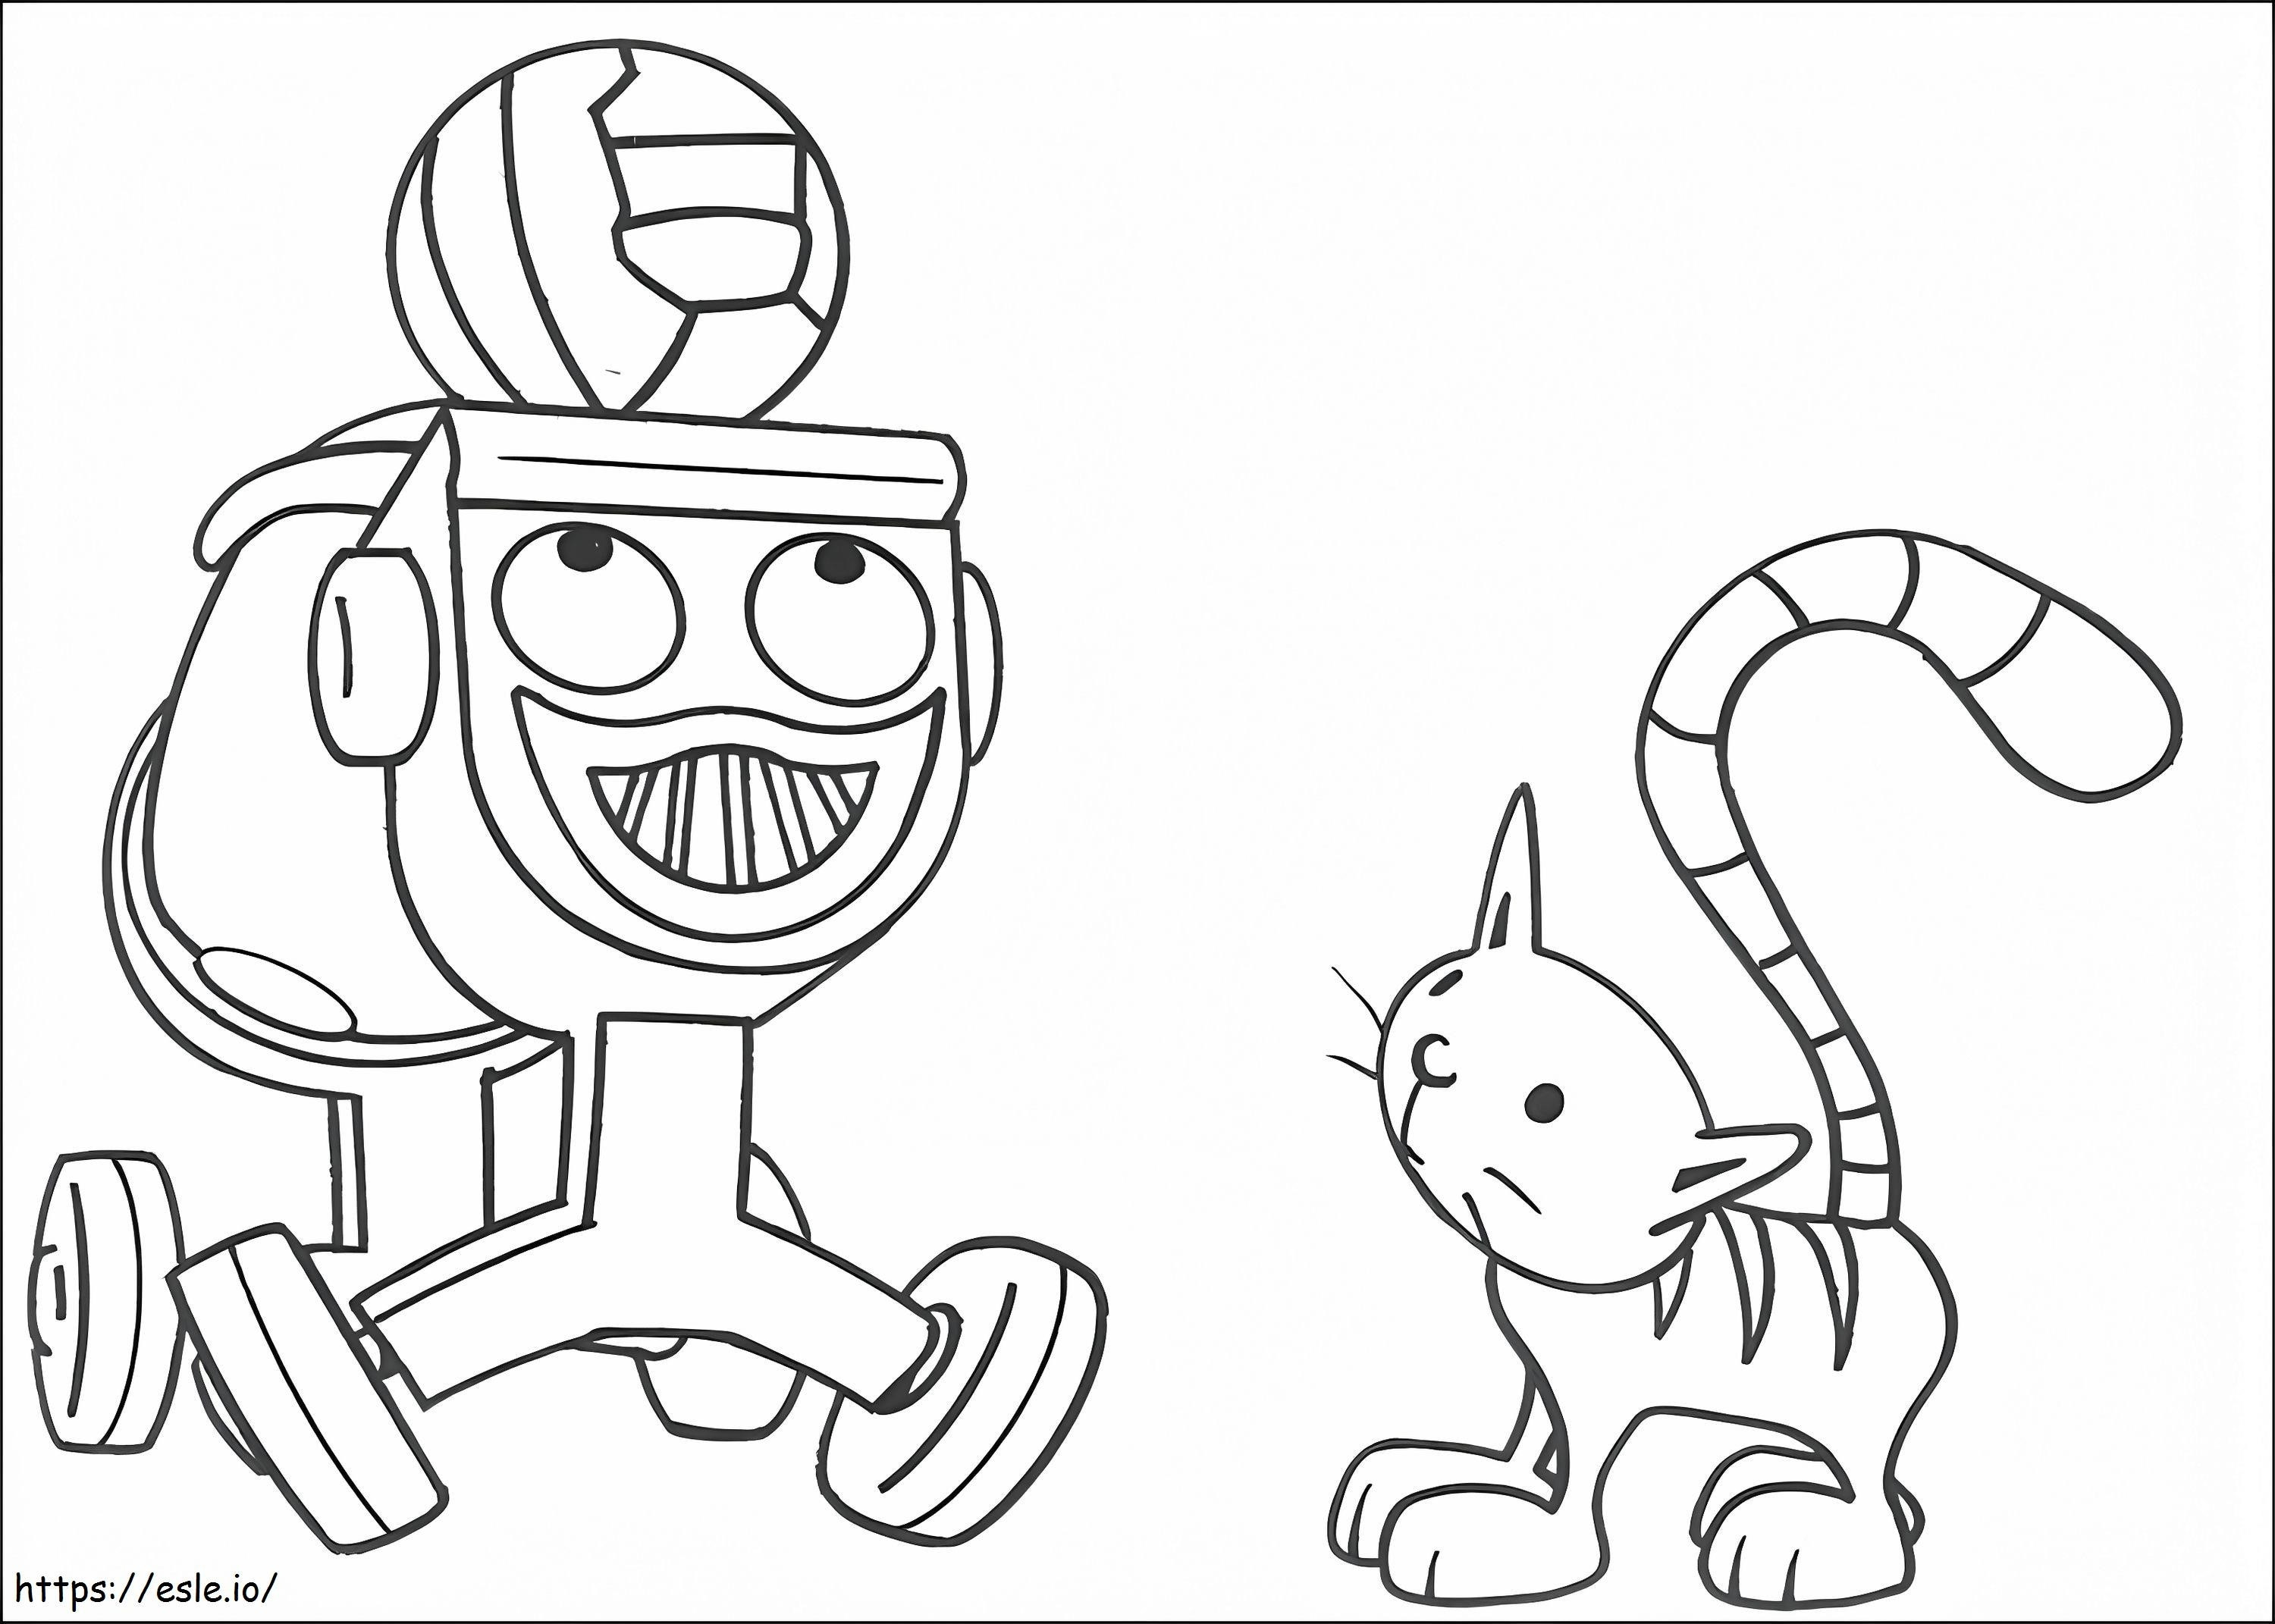 1534129459 Dizzy And Pilchard A4 E1600248038888 coloring page